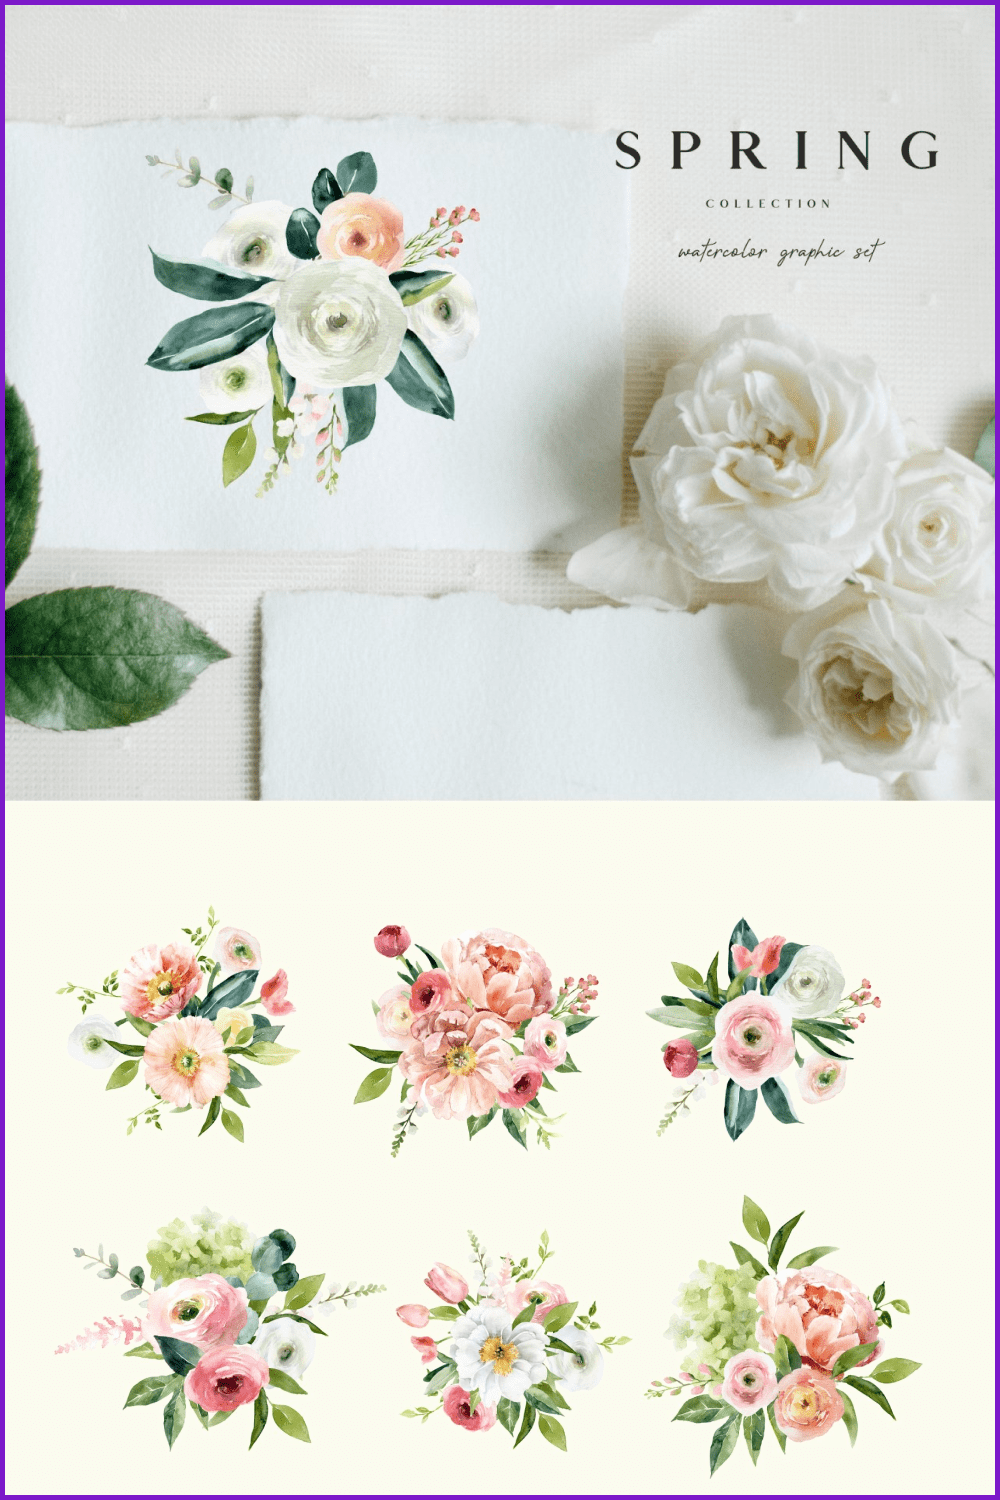 Drawing with a bouquet of white and pink peonies.